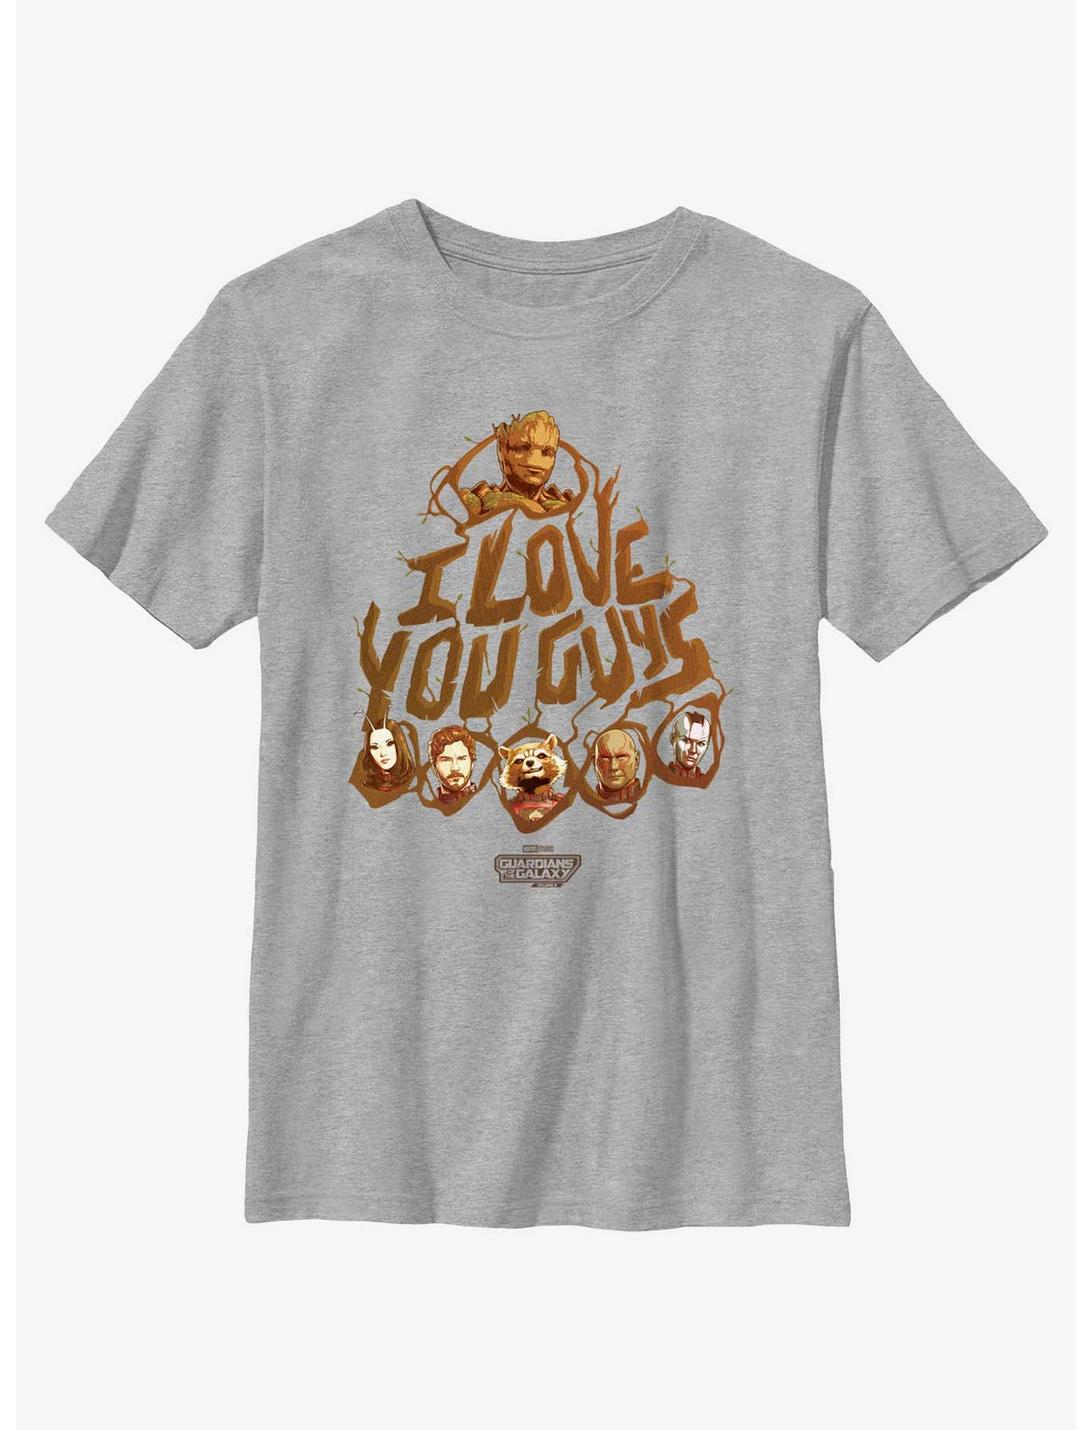 Guardians Of The Galaxy Vol. 3 Love You Guys Youth T-Shirt, ATH HTR, hi-res